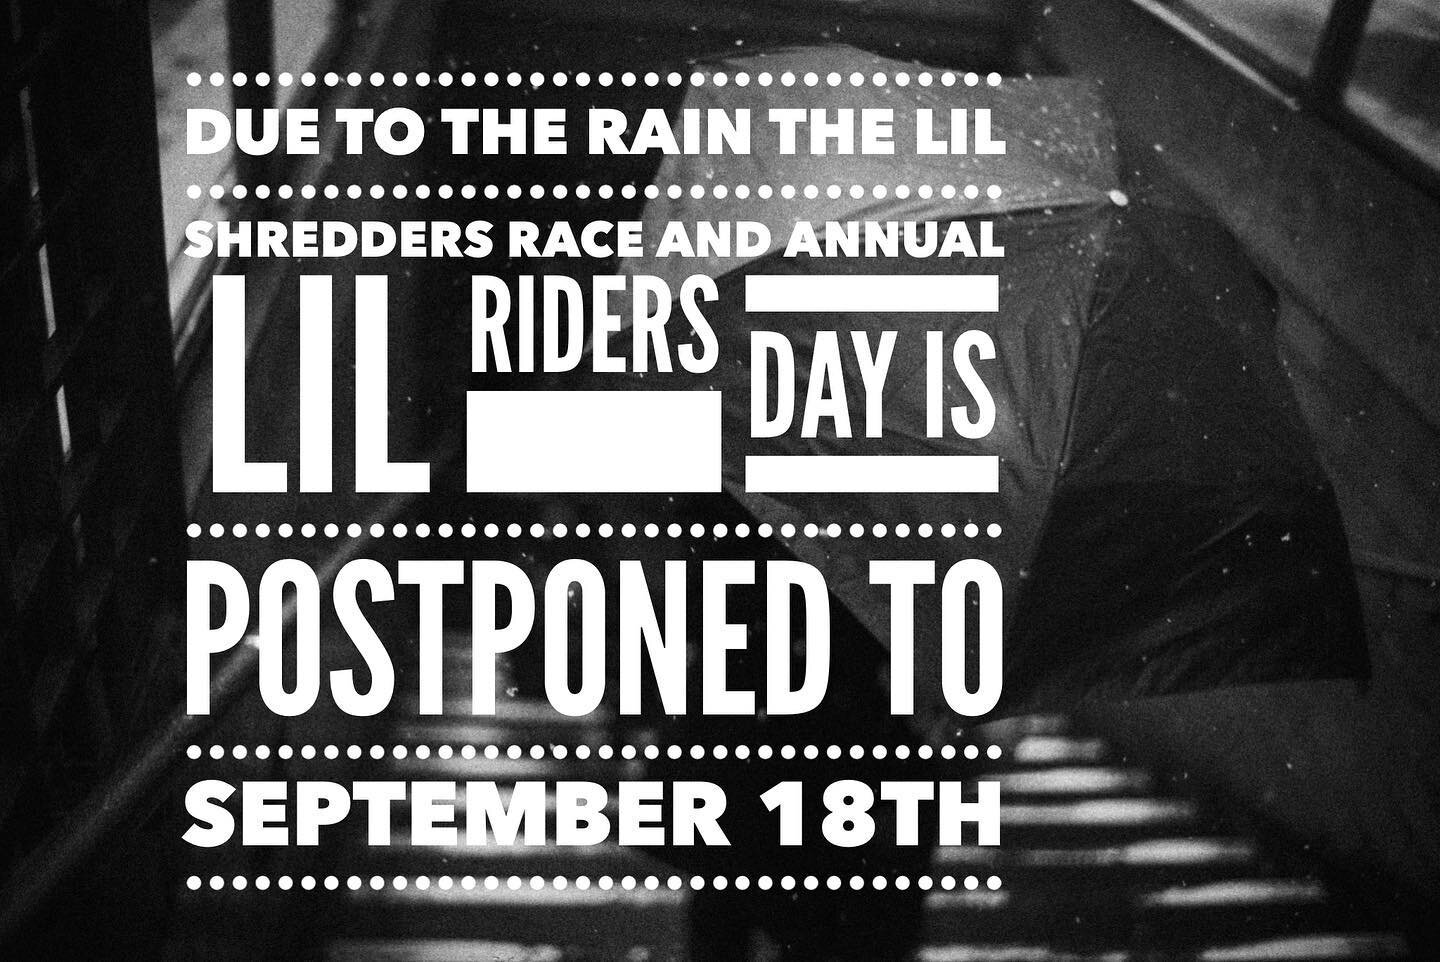 So folks!!! Too much rain makes for a very muddy event!! We&rsquo;ve rescheduled for September 18th! #rainraingoaway